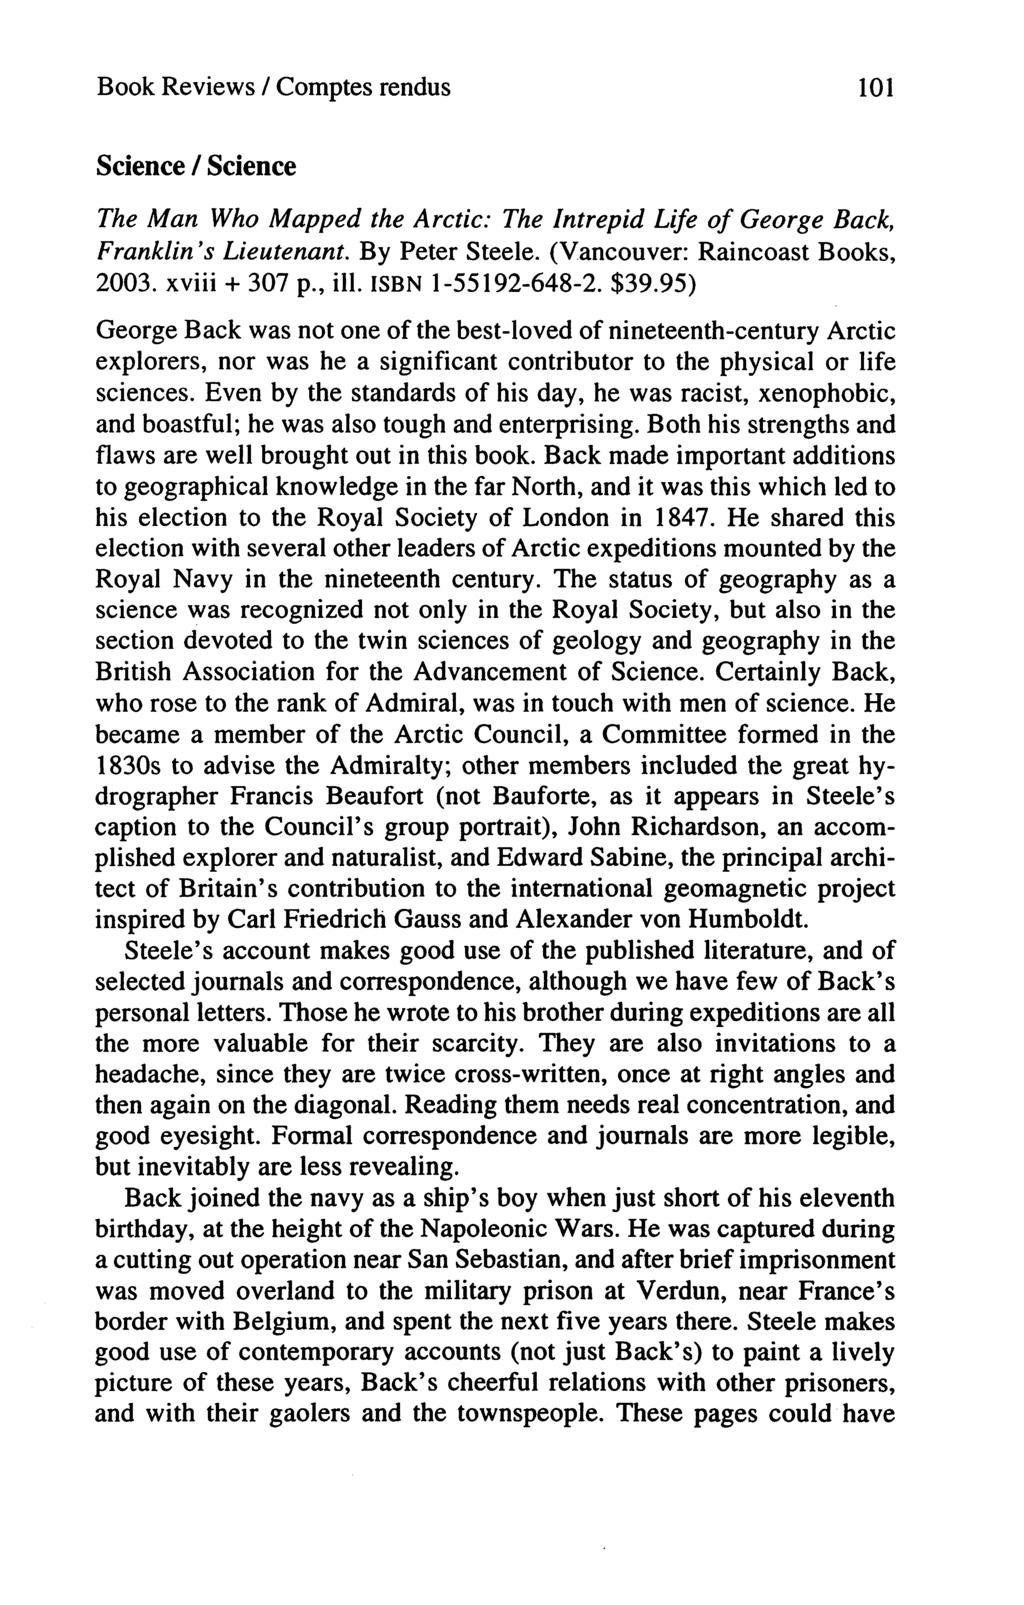 Book Reviews / Comptes rendus 101 Science / Science The Man Who Mapped the Arctic: The Intrepid Life of George Back, Franklin's Lieutenant. By Peter Steele. (Vancouver: Raincoast Books, 2003.